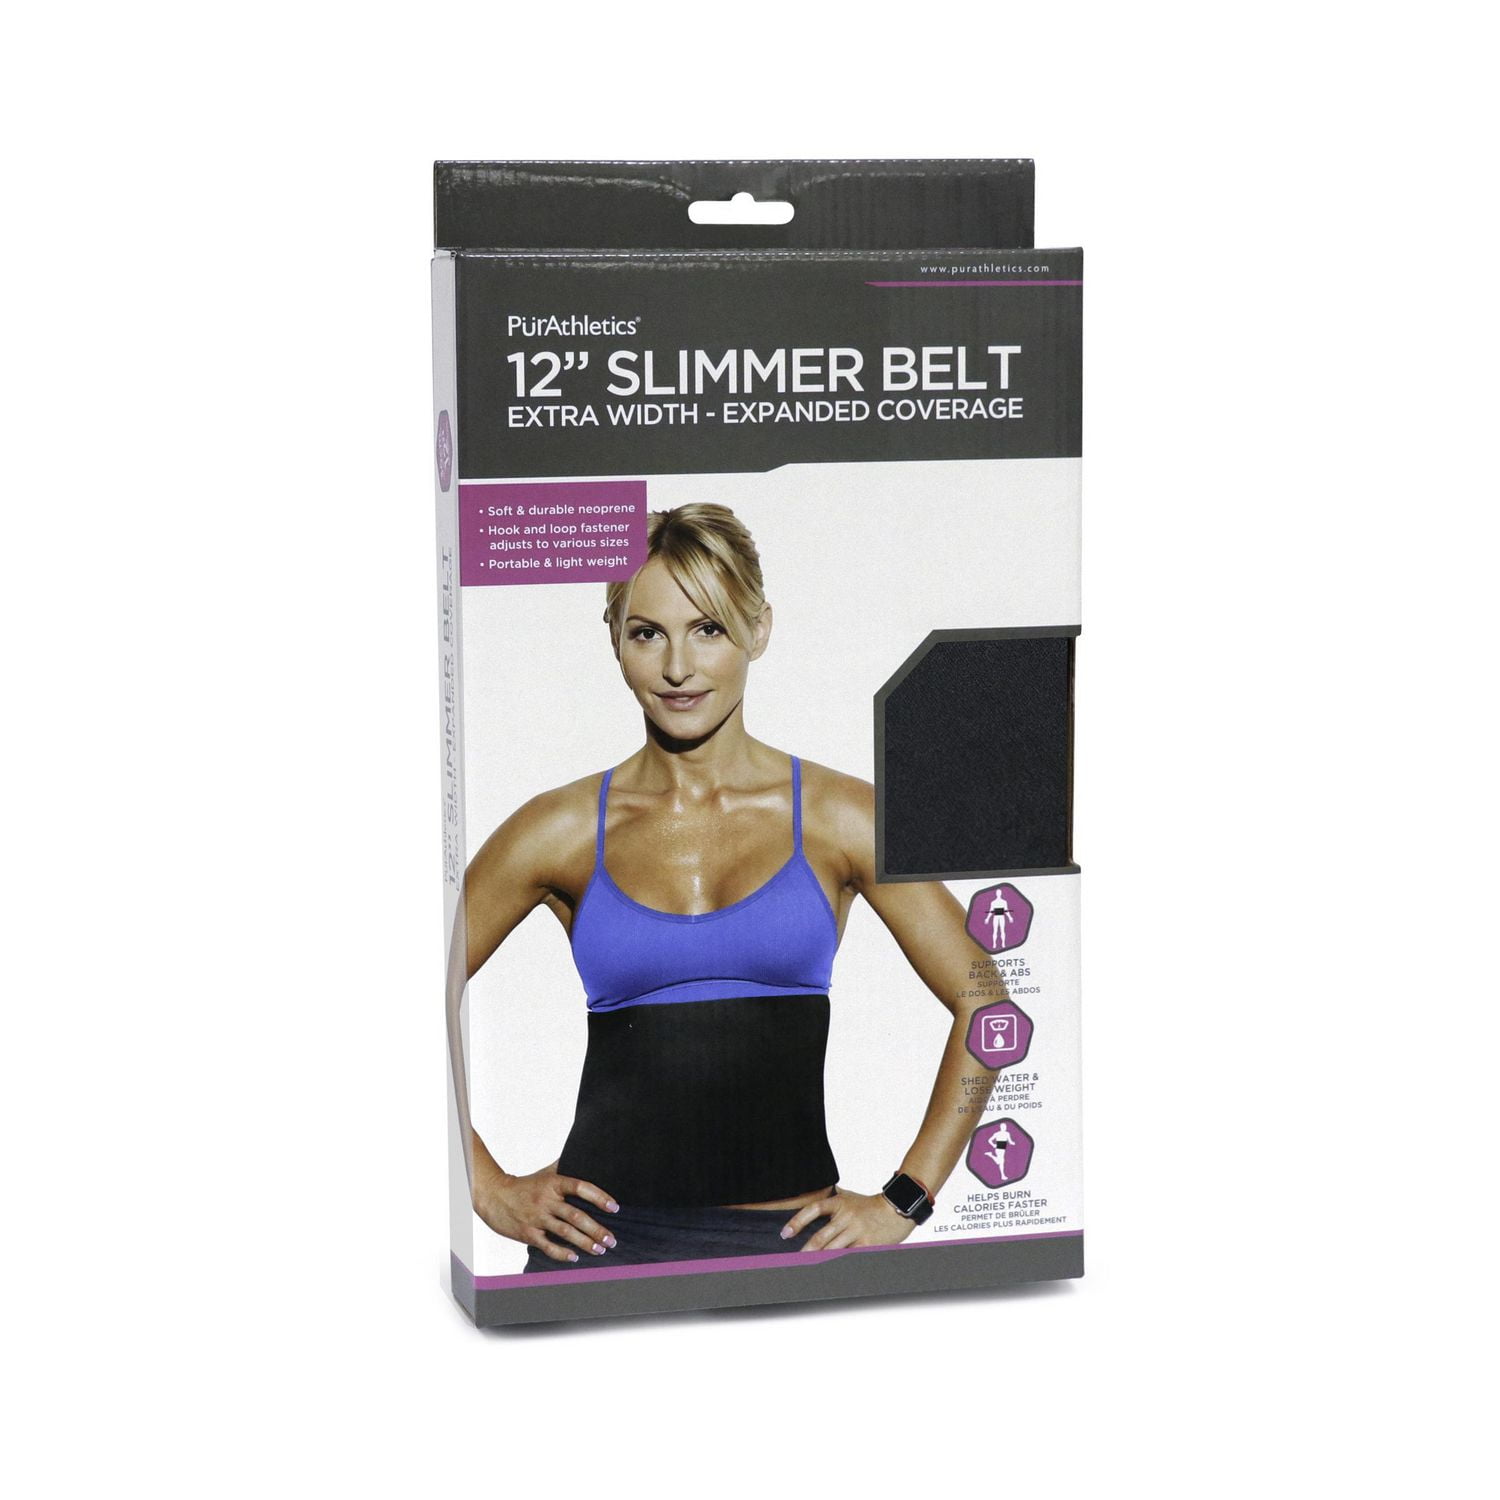 FITNESS SLIMMER BELT 12IN PREMIU QUALITY HELPS SHED EXCESS WATER - SAYAL  Electronics and Hobbies